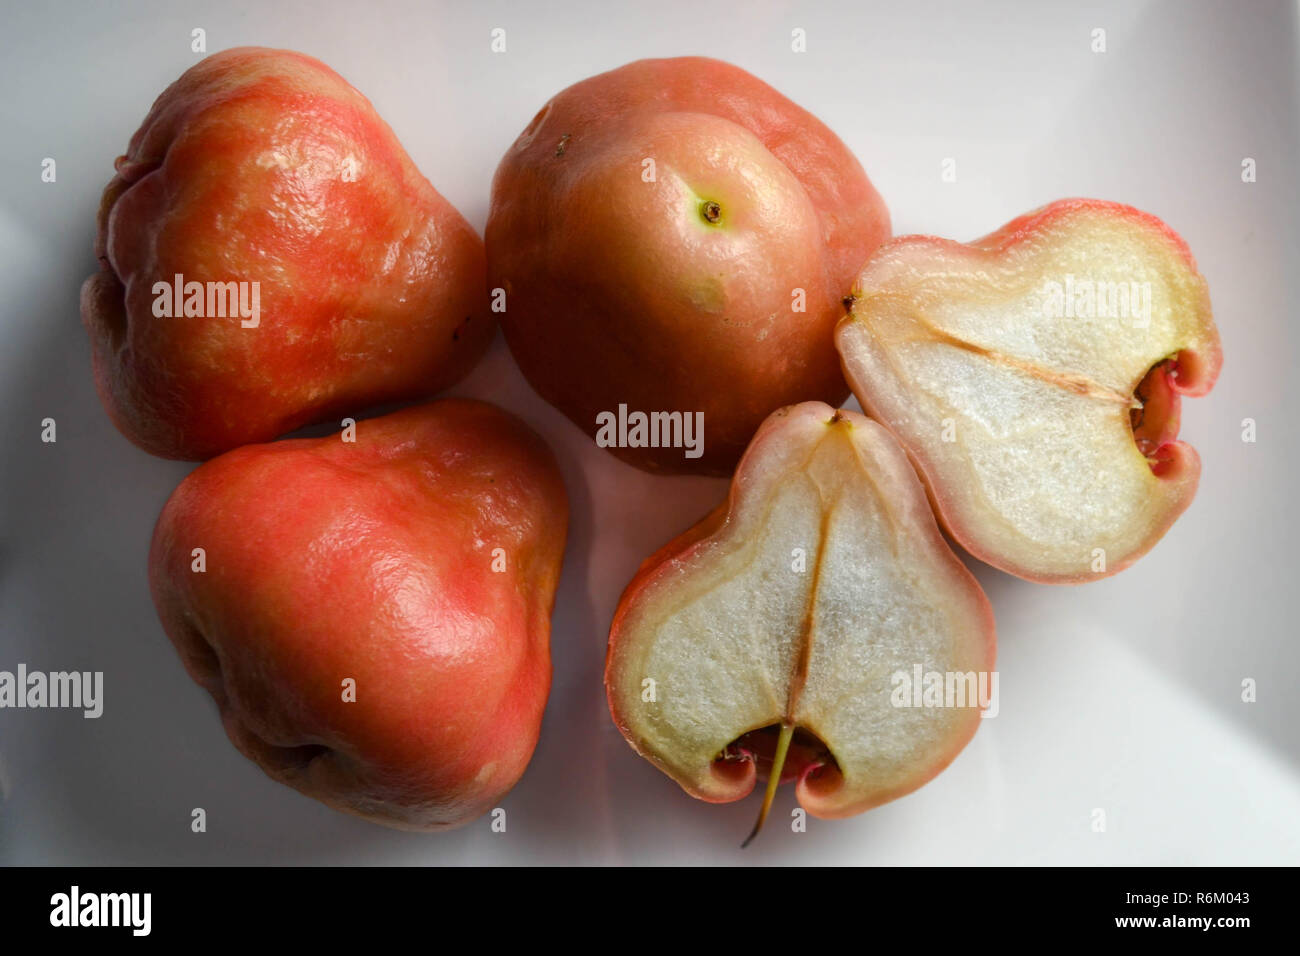 Wax Apples (aka Rose Apples - Syzygium samarangense) on a white plate, including one show in cross-section. Stock Photo